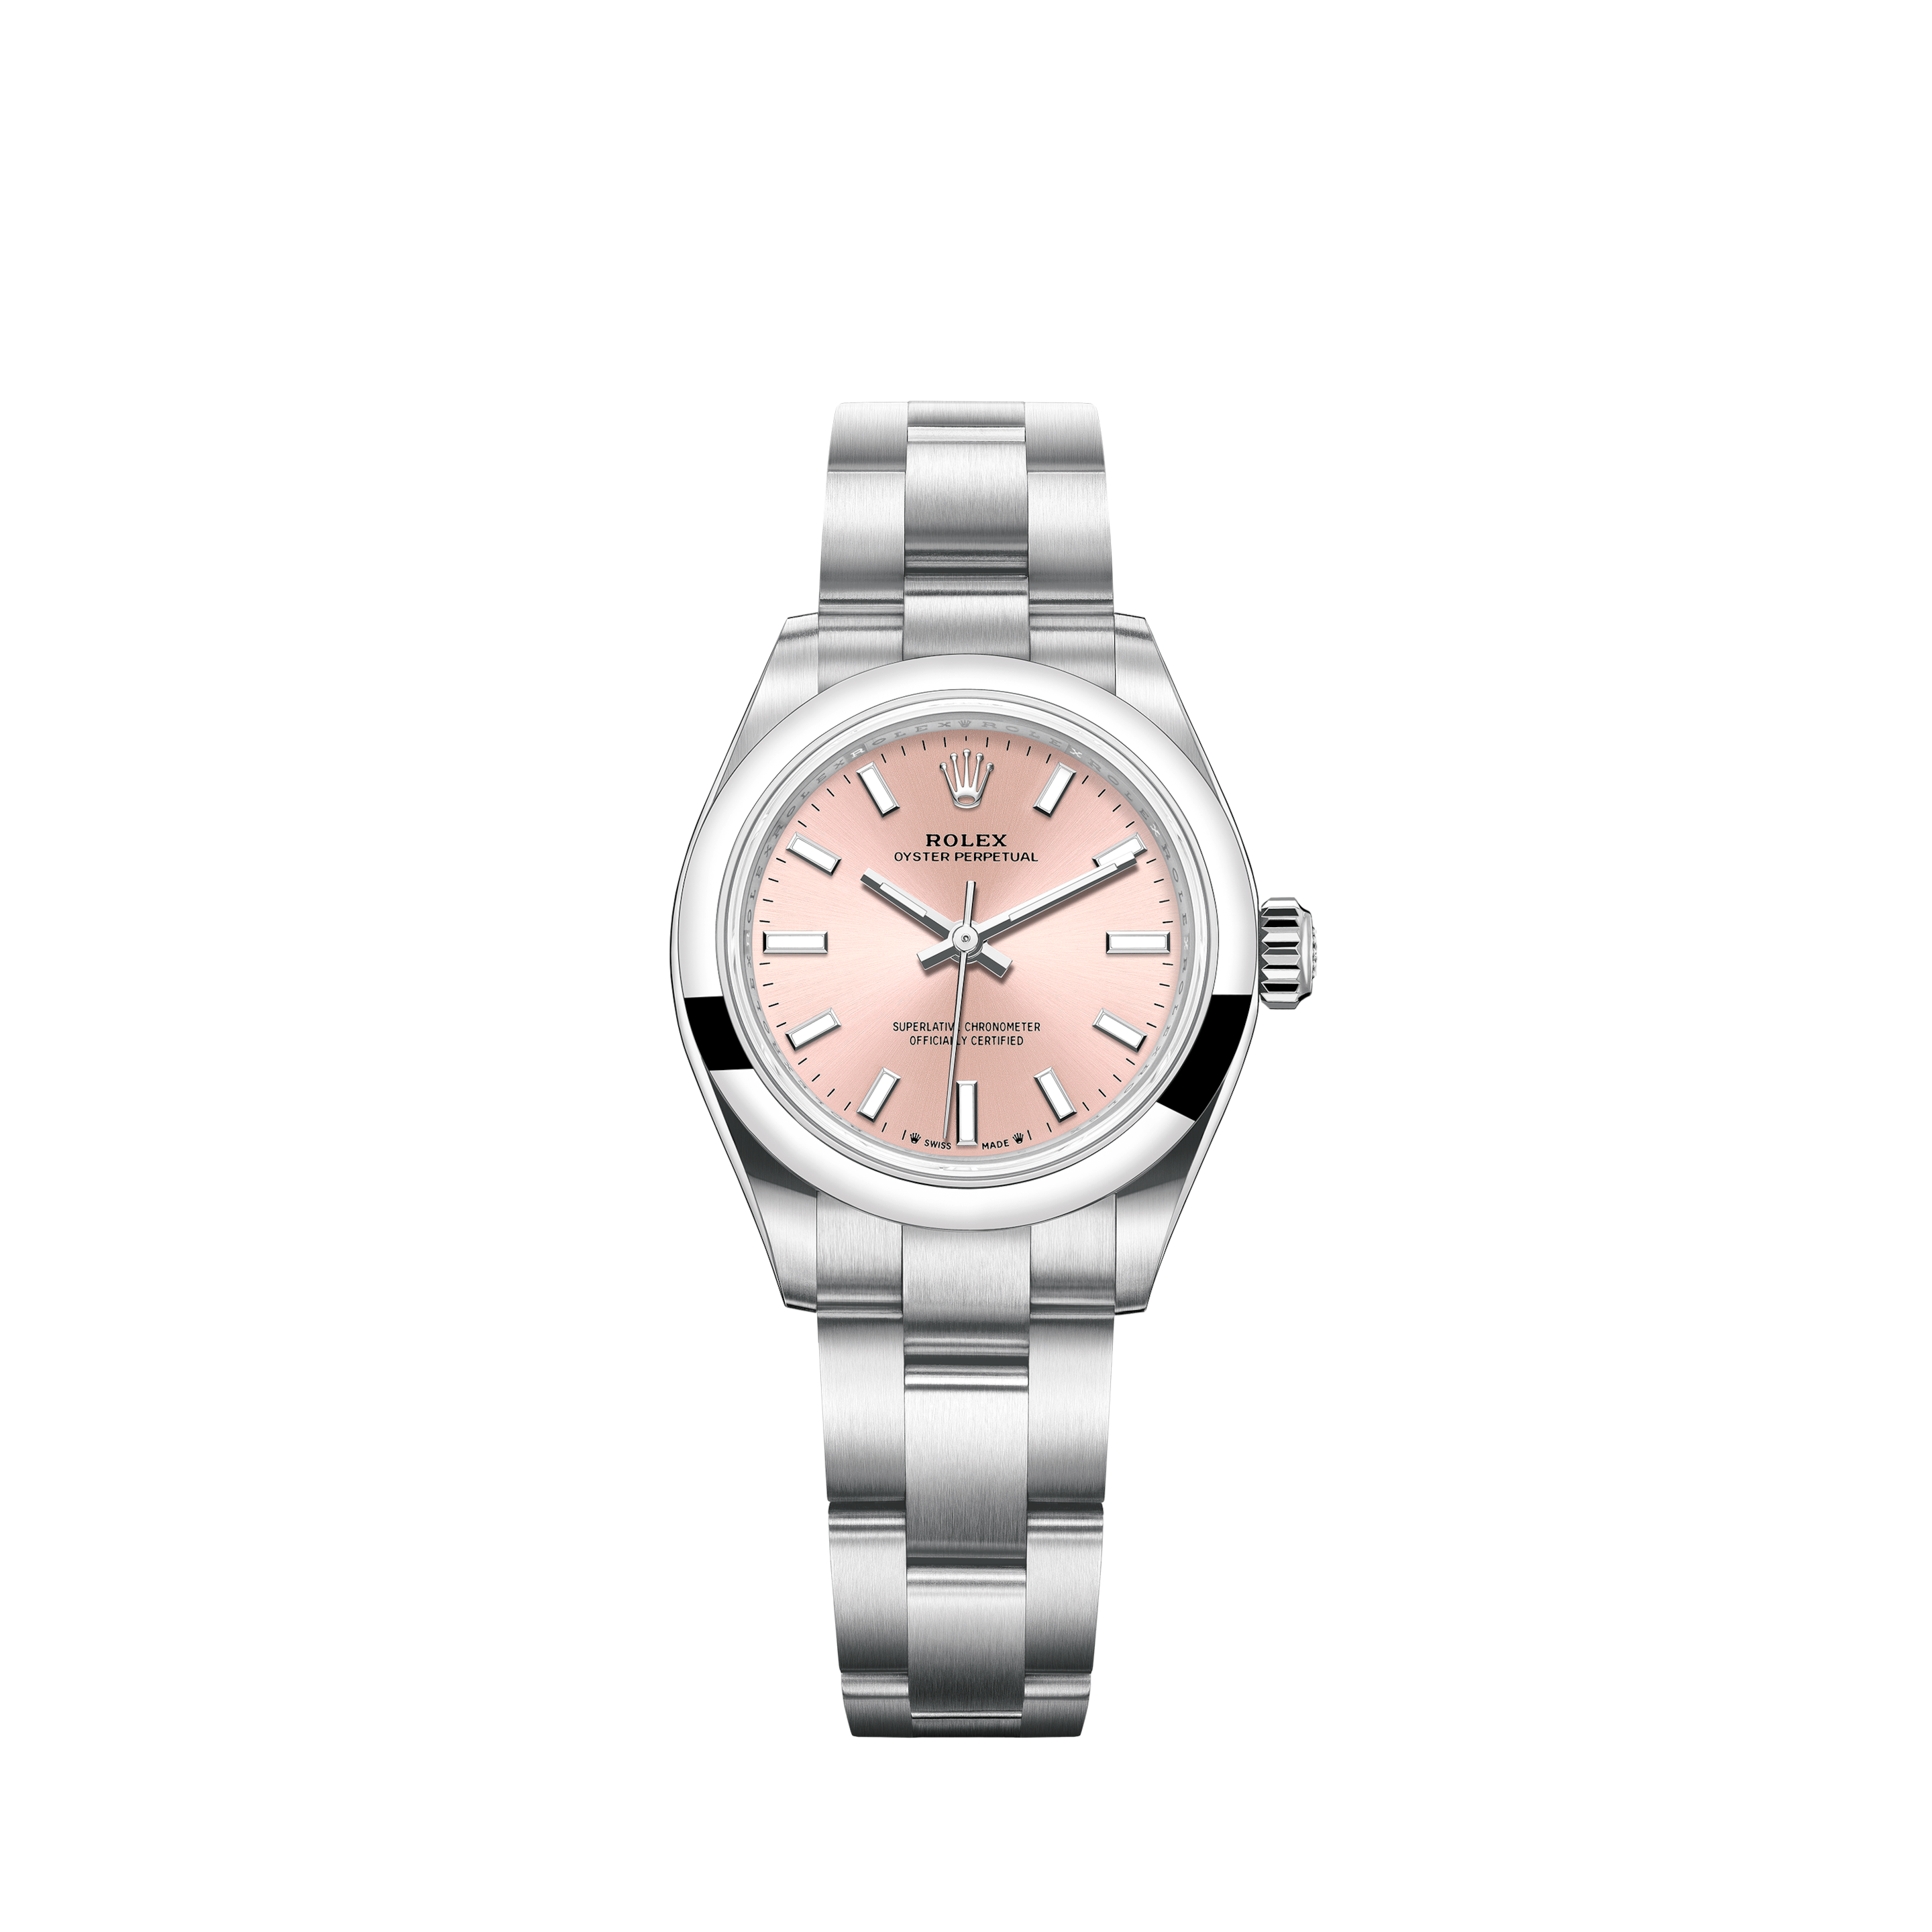 rolex oyster perpetual datejust 28